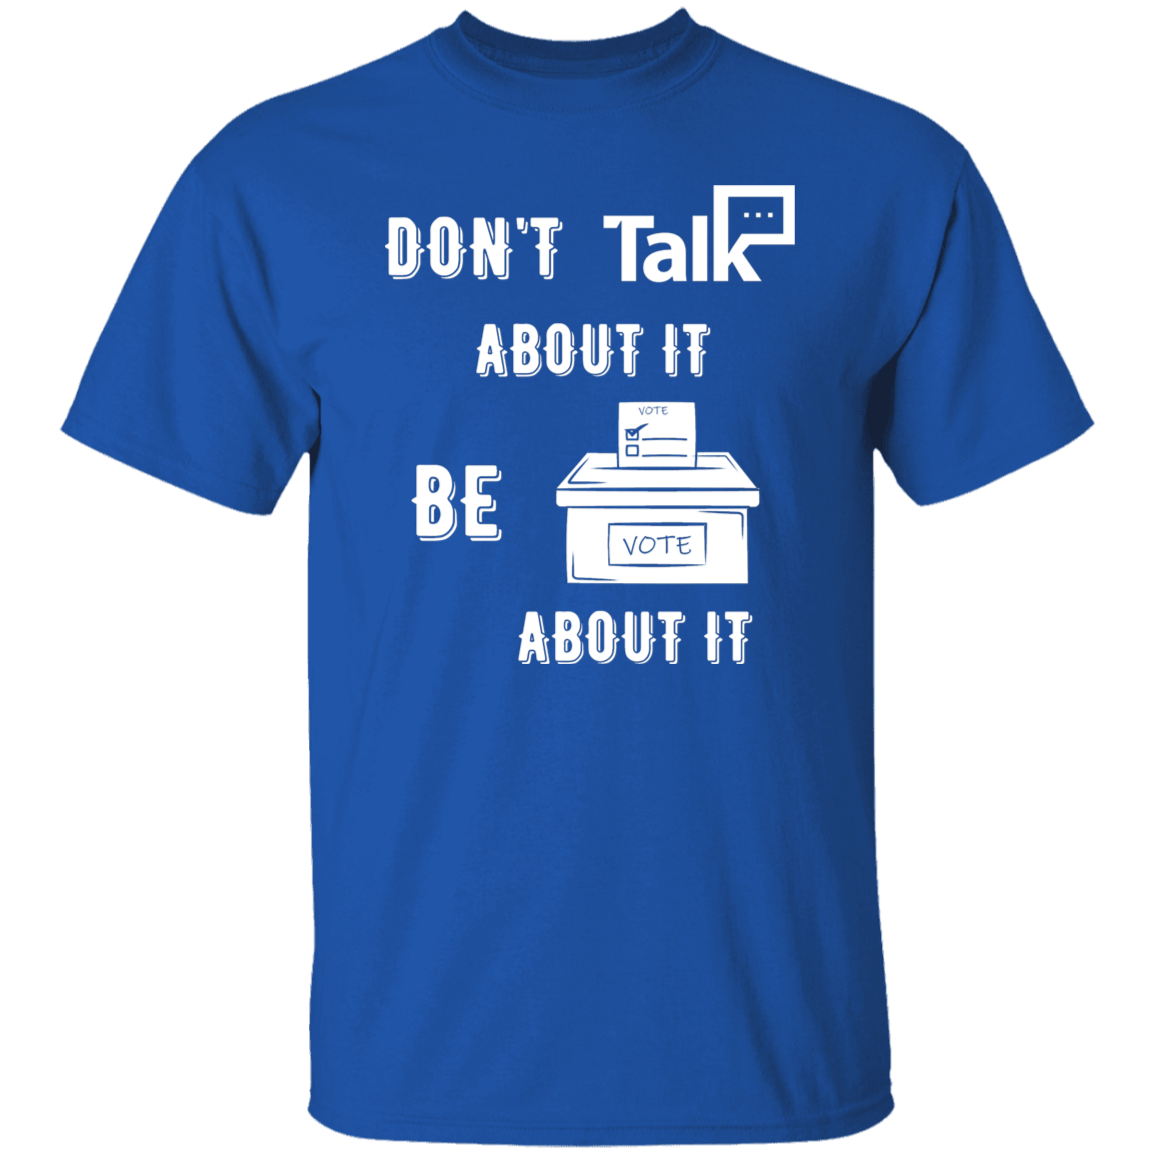 Don't Talk About It - Vote Short Sleeve Shirt